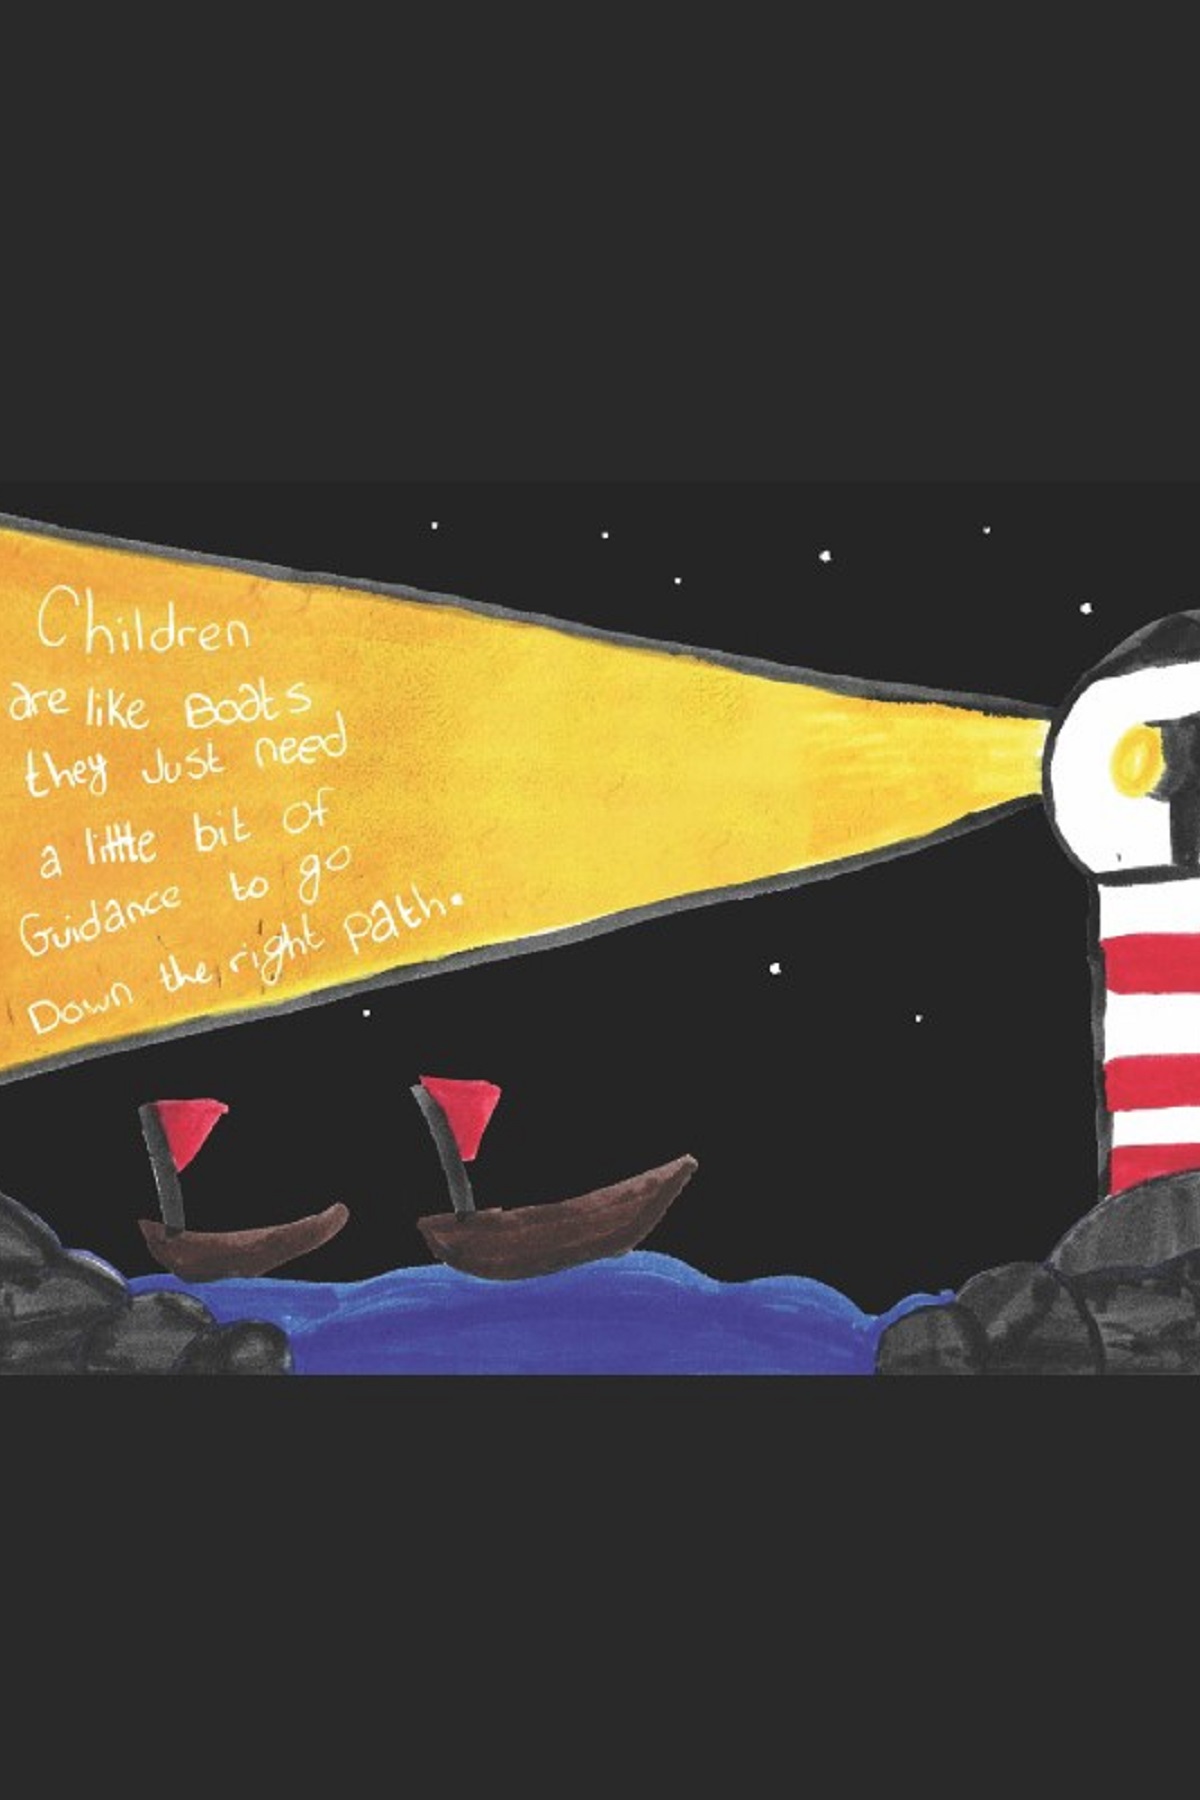 Children are like boats. They just need a little bit of guidance to go down the right path. This text is written in a light coming from a lighthouse with two boats visible in the sea.